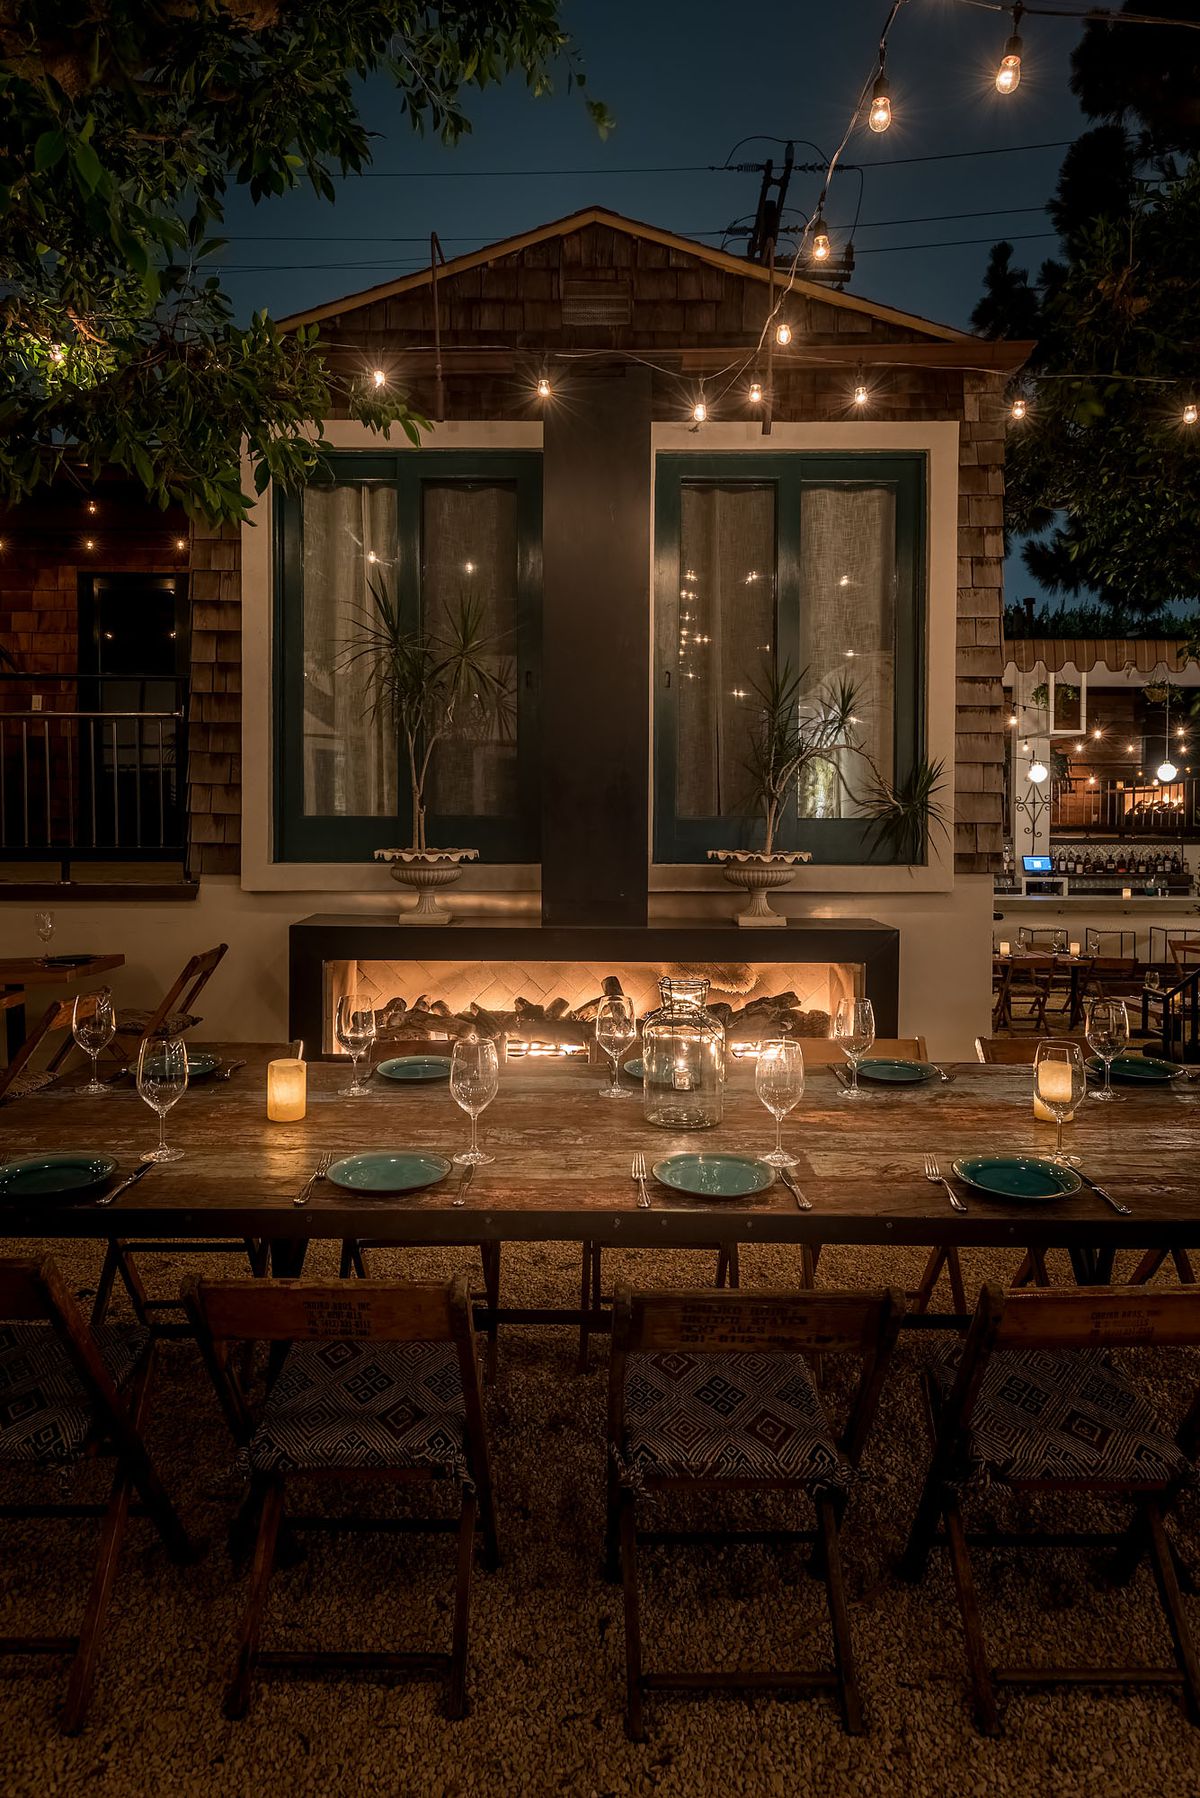 String lights outline large windows on an outdoor dinner patio.